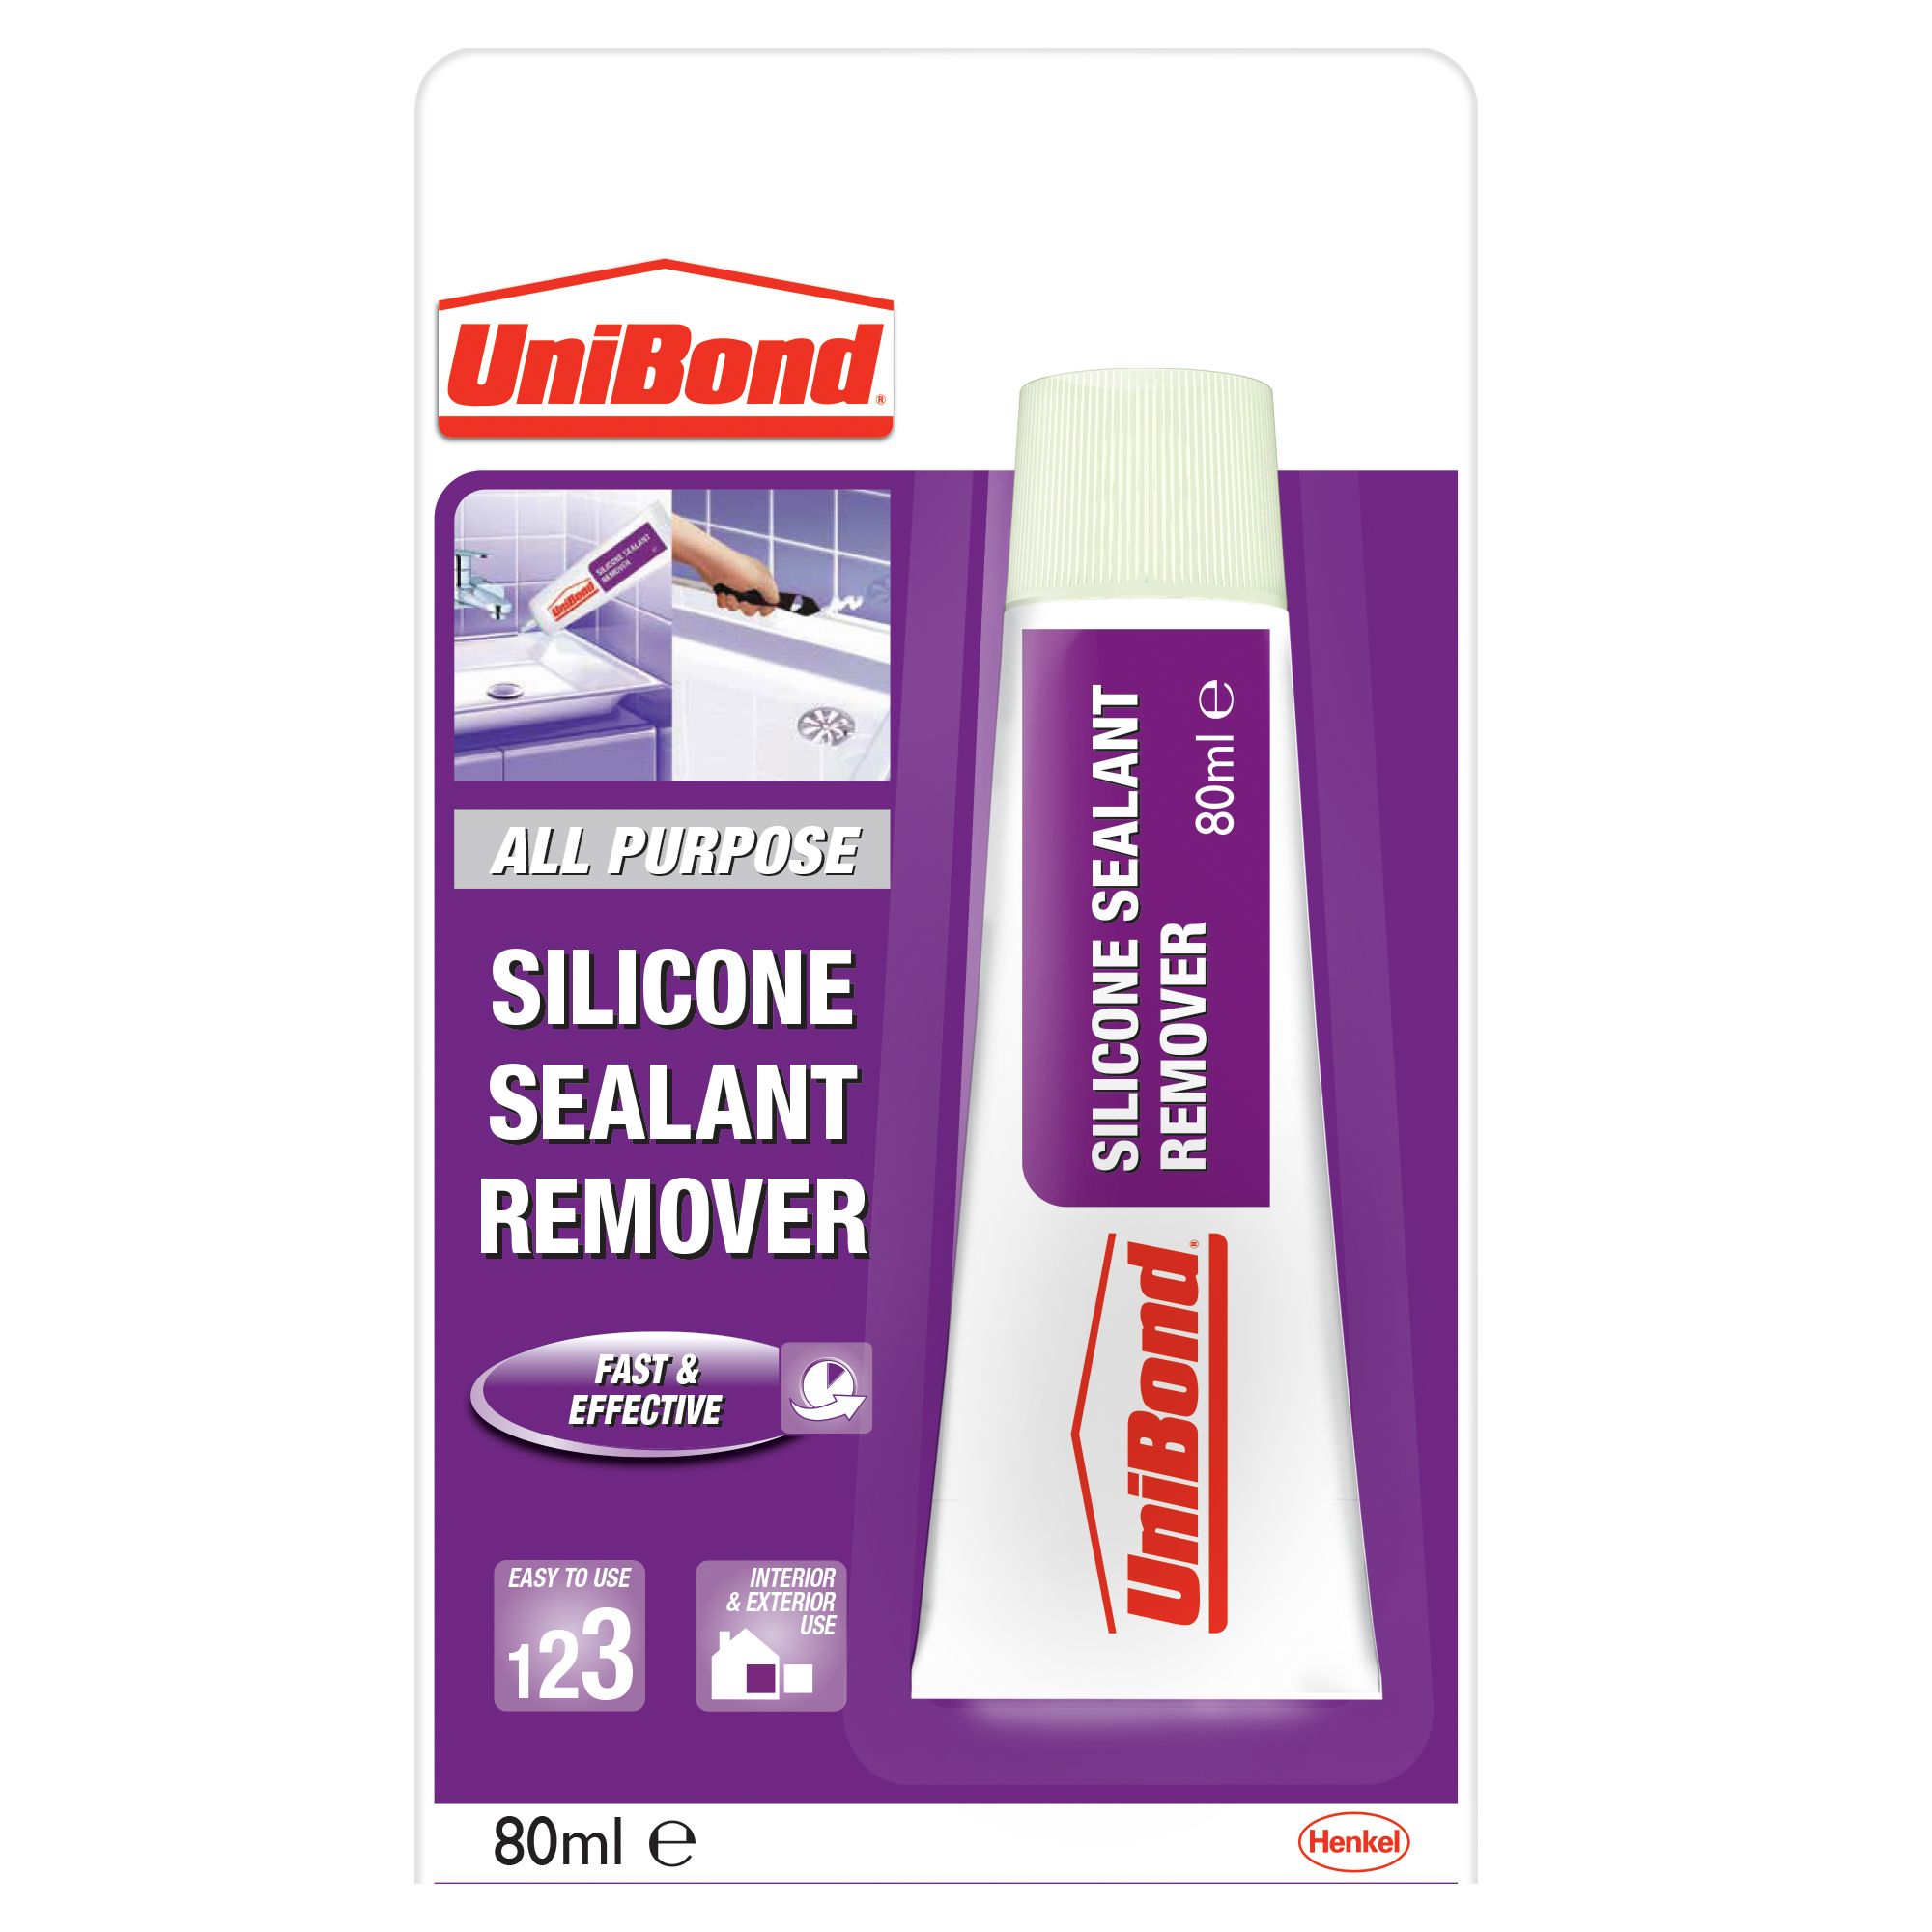 Diall Sealant Smoother & remover tool